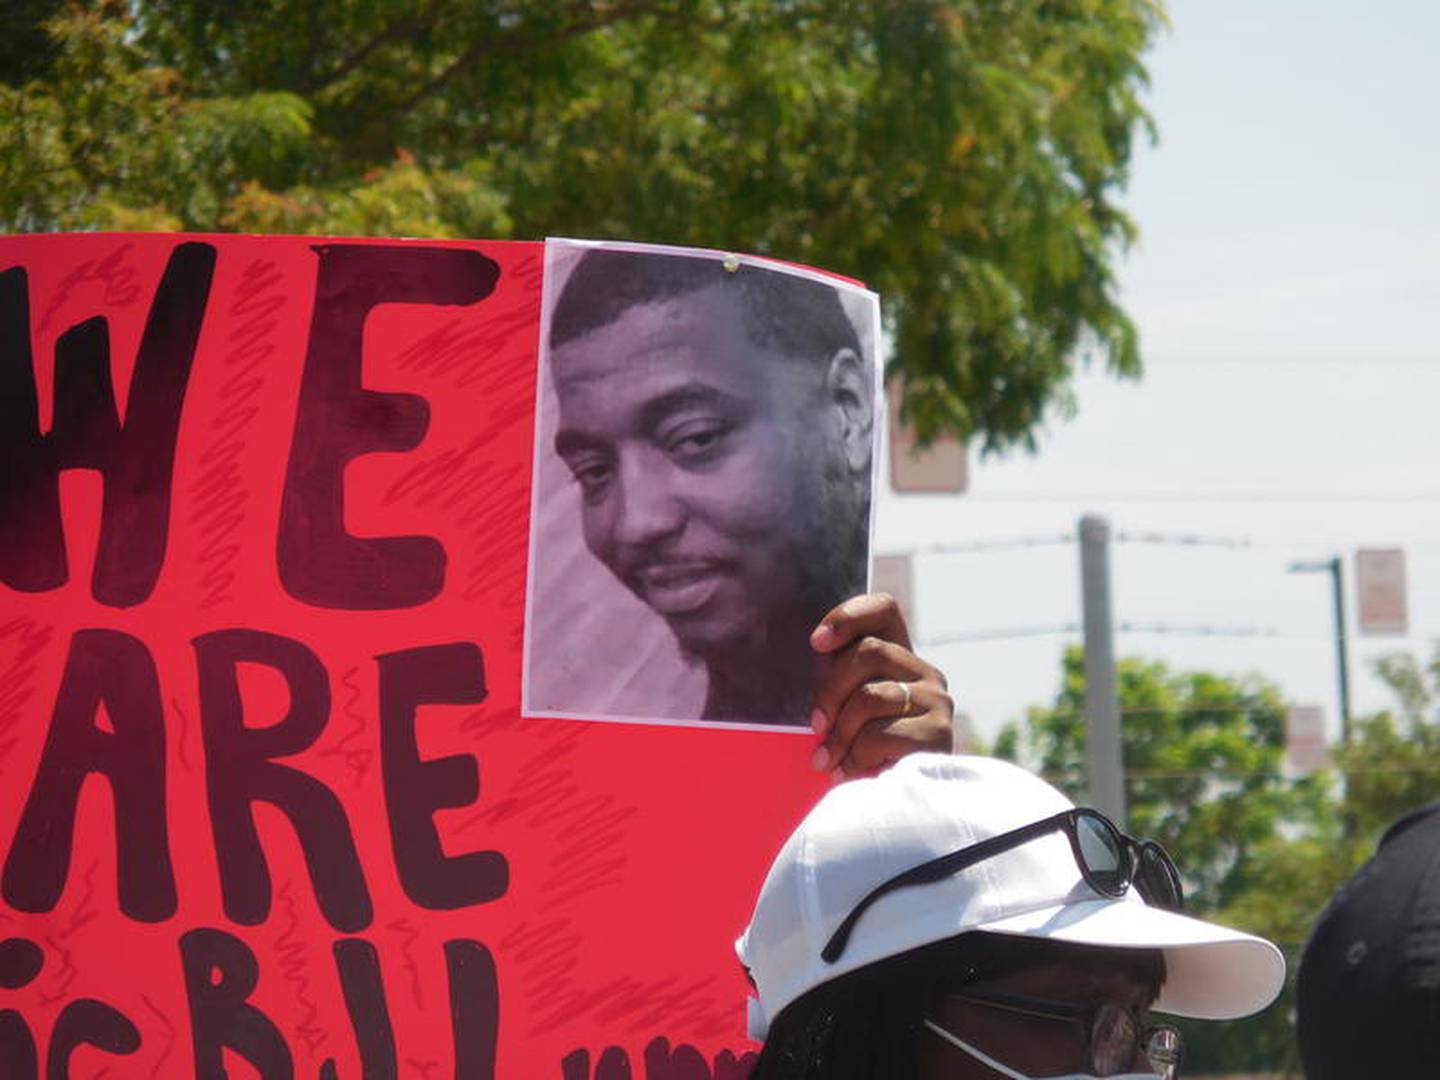 Demonstrators protested the death of Eric Lurry on Friday outside the Joliet Police Department.